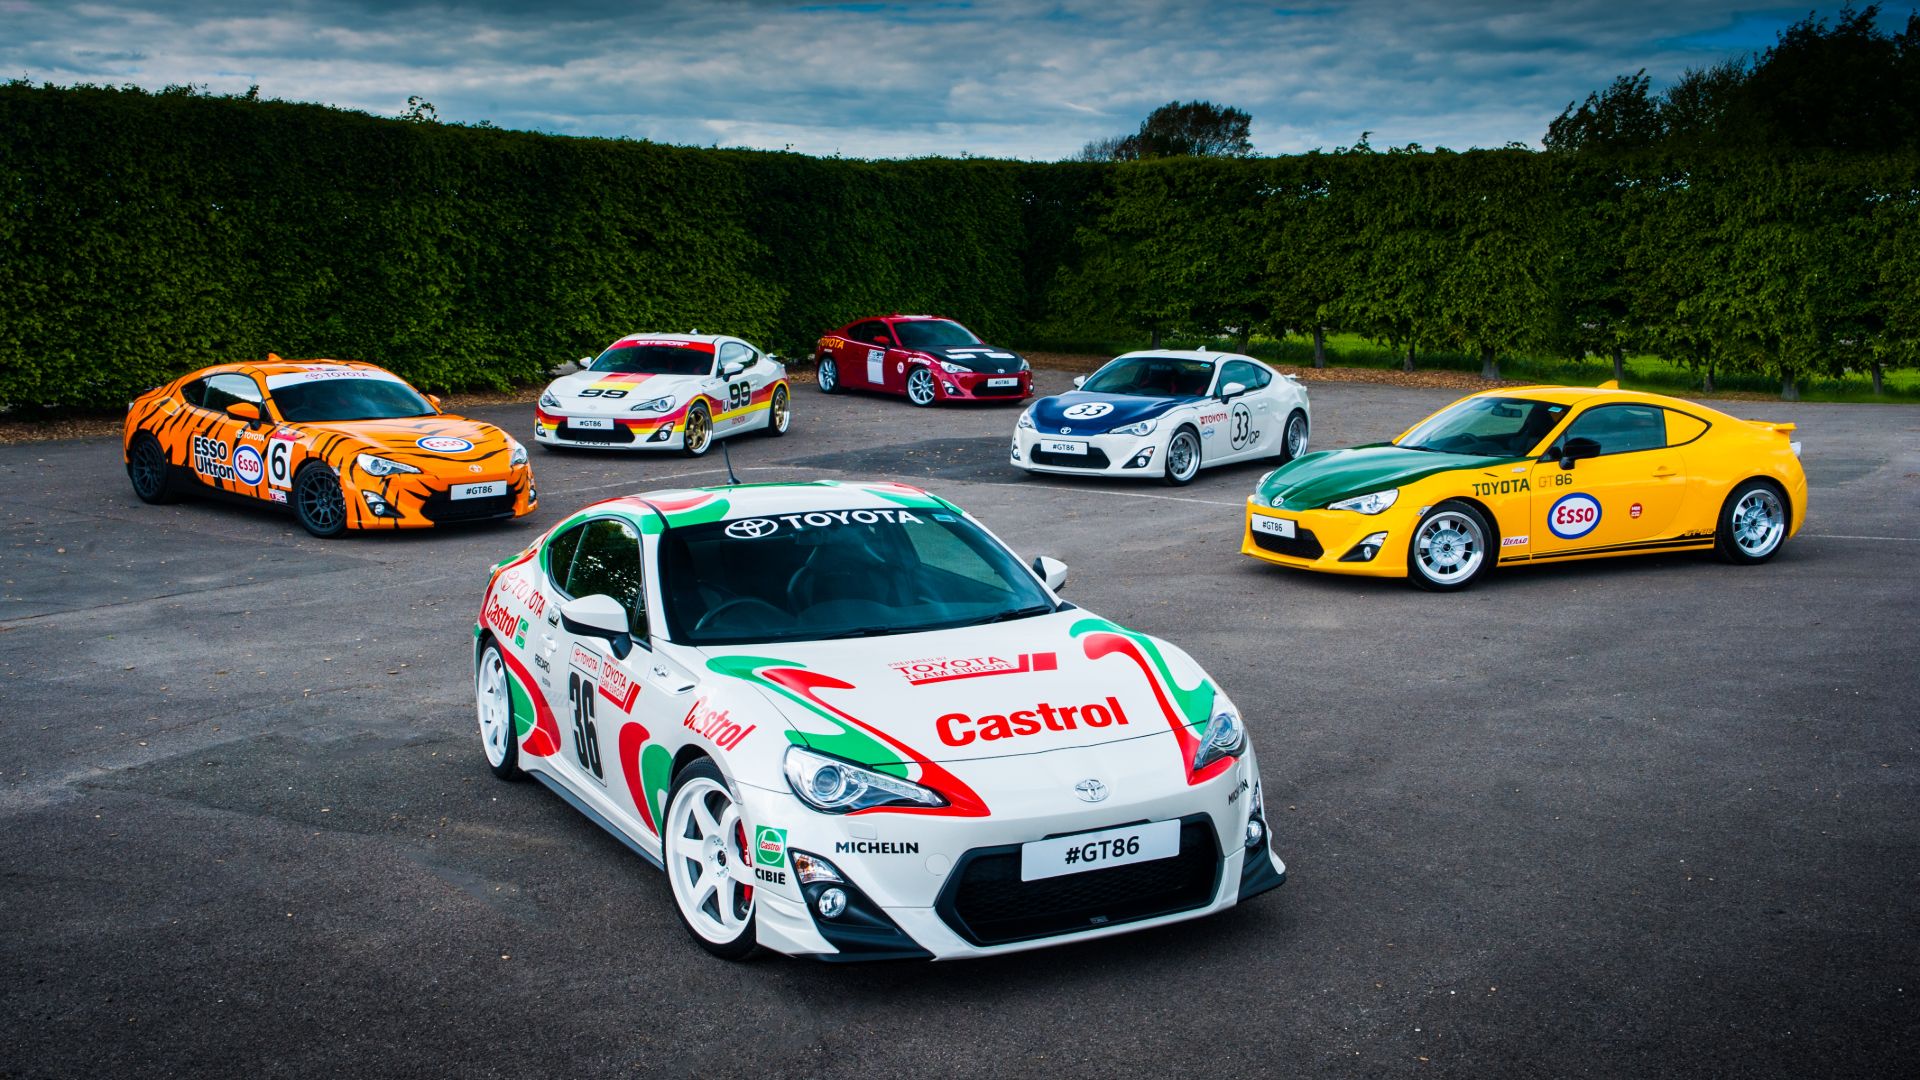 The story of the GT86